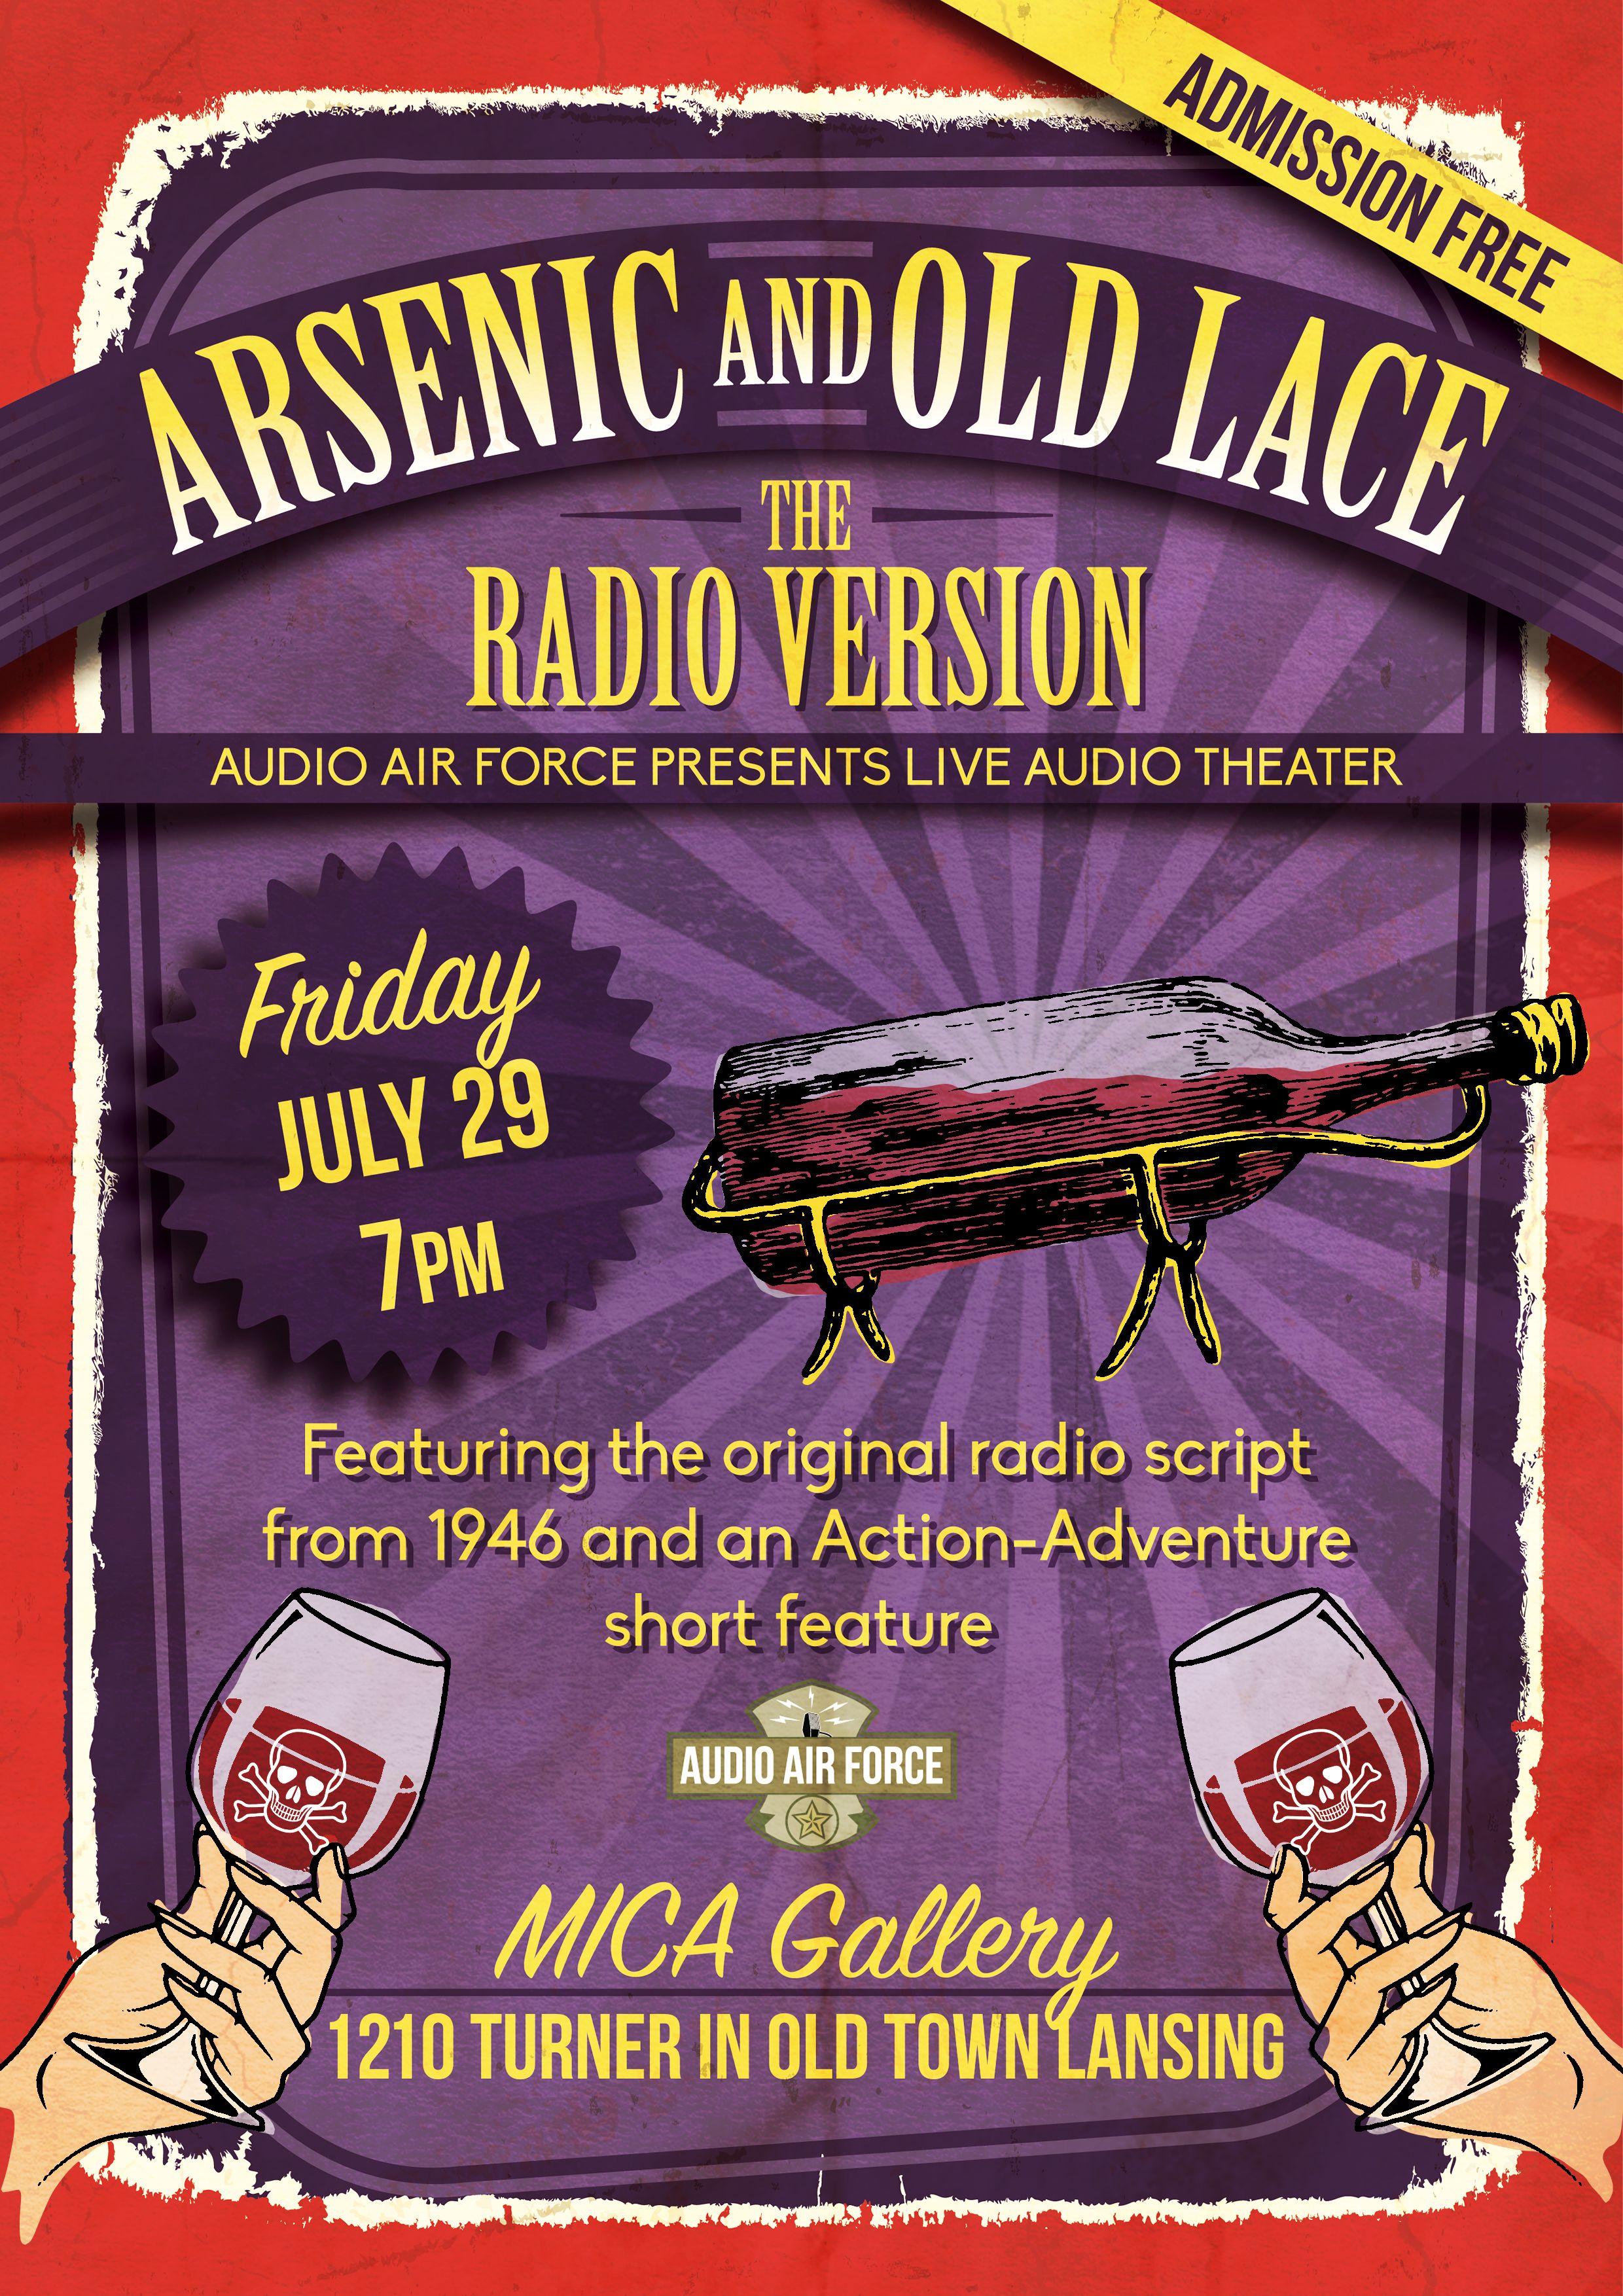 Audio Air Force Presents “Arsenic & Old Lace”